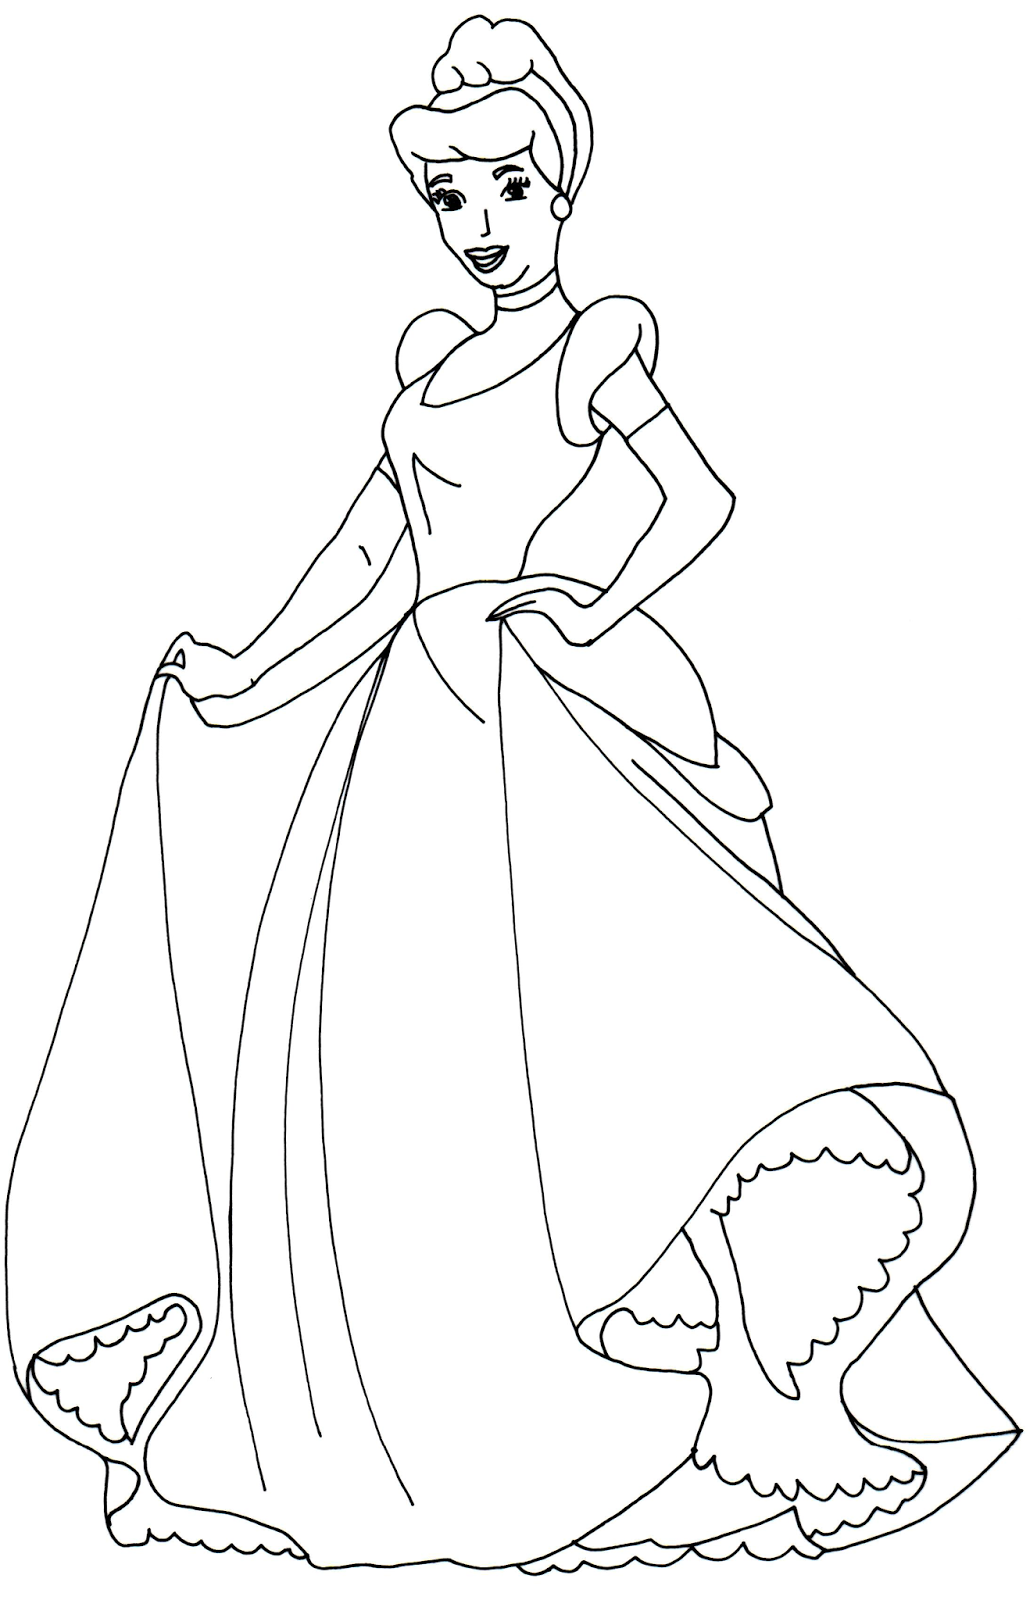 Sofia The First Coloring Pages To